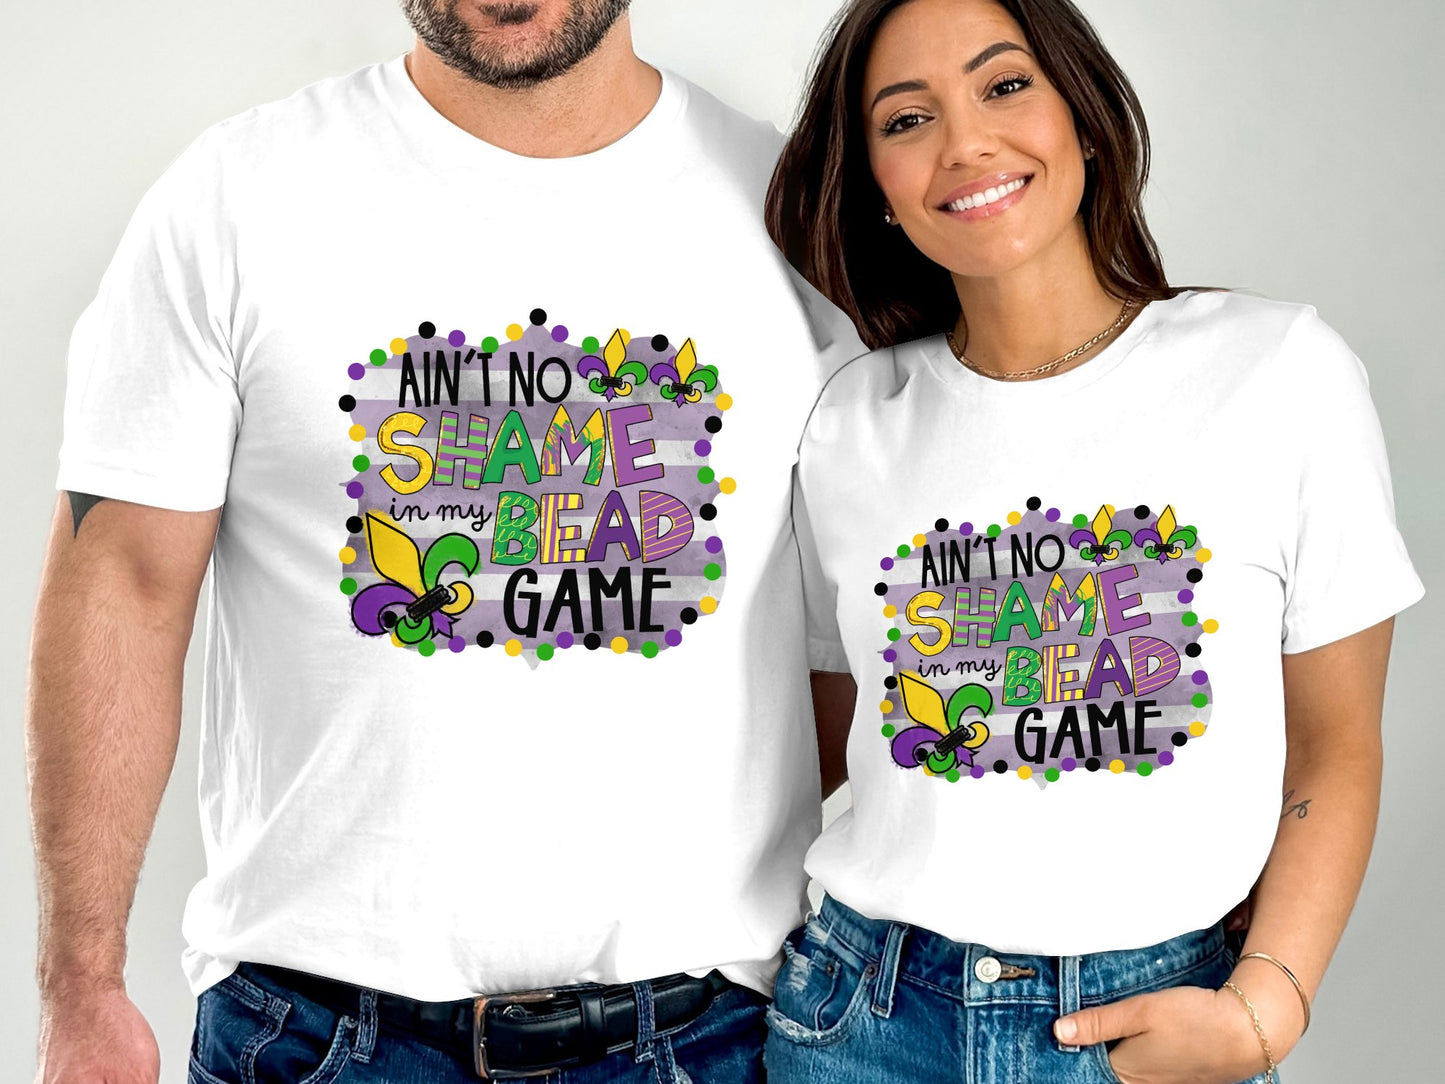 Ain't No Shame in my Bead Game T-shirt